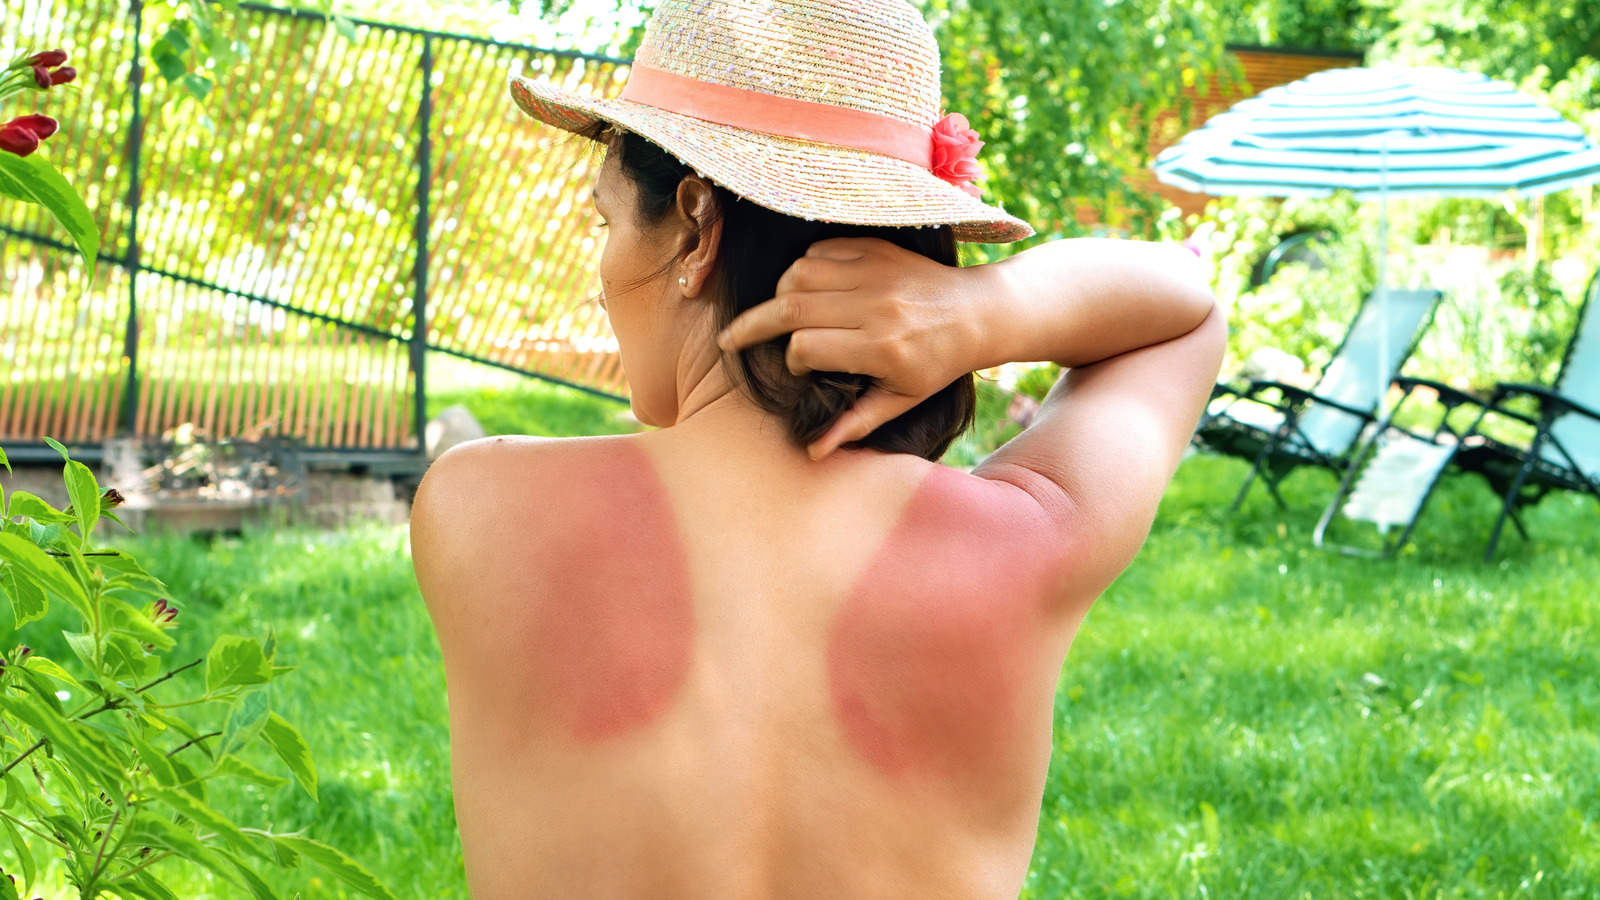 Should You Take Ibuprofen After Getting A Bad Sunburn? Here's What We Know - Health Digest